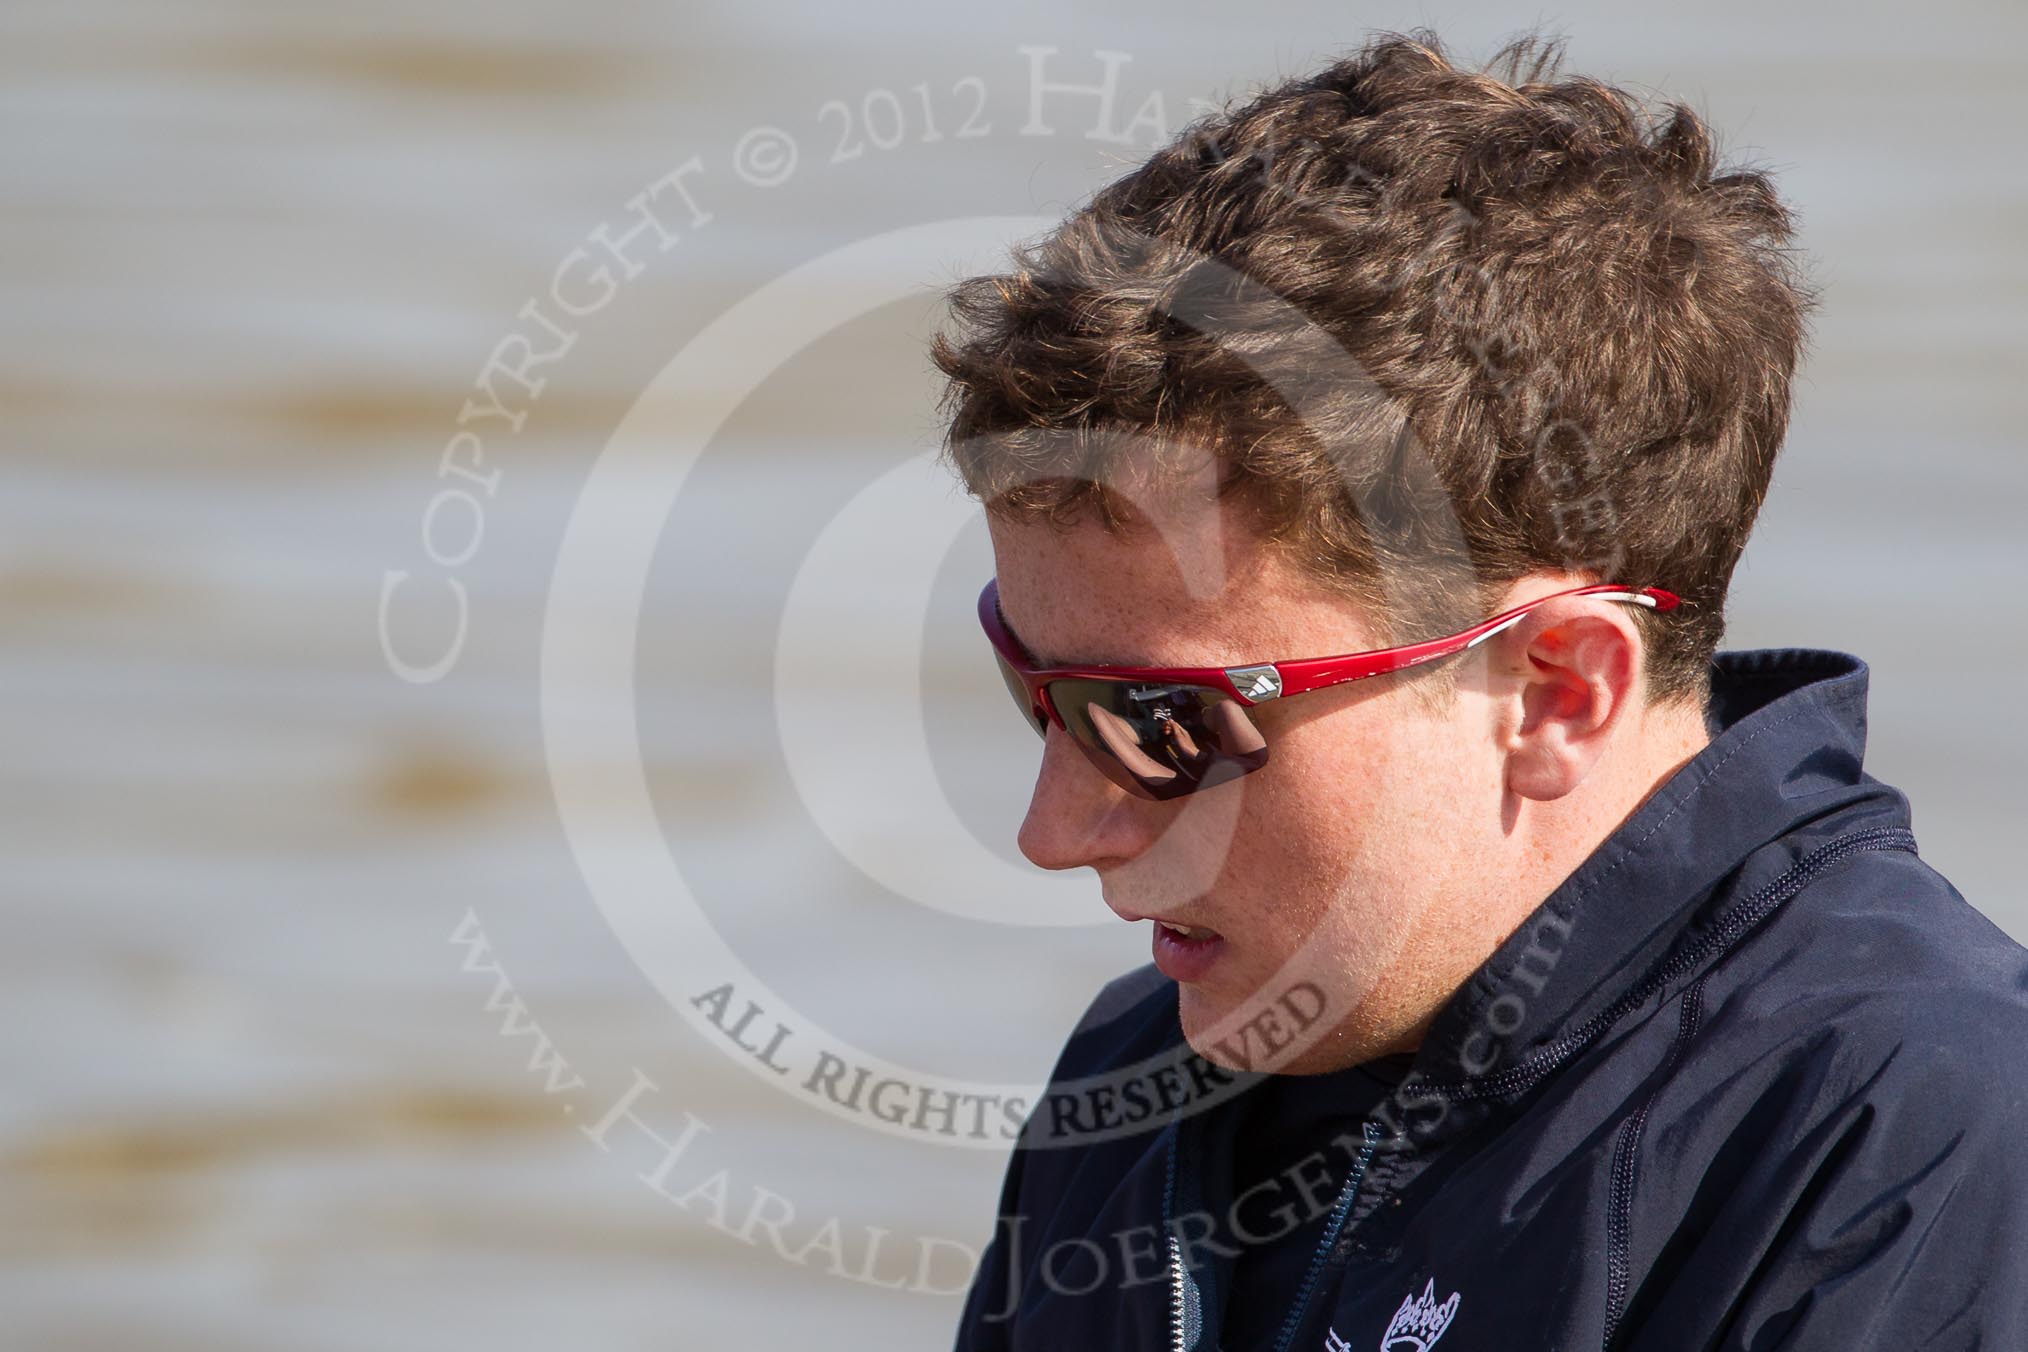 The Boat Race season 2012 - fixture OUBC vs Leander: OUBC's Blue Boat 7 seat Dan Harvey..




on 24 March 2012 at 13:42, image #35